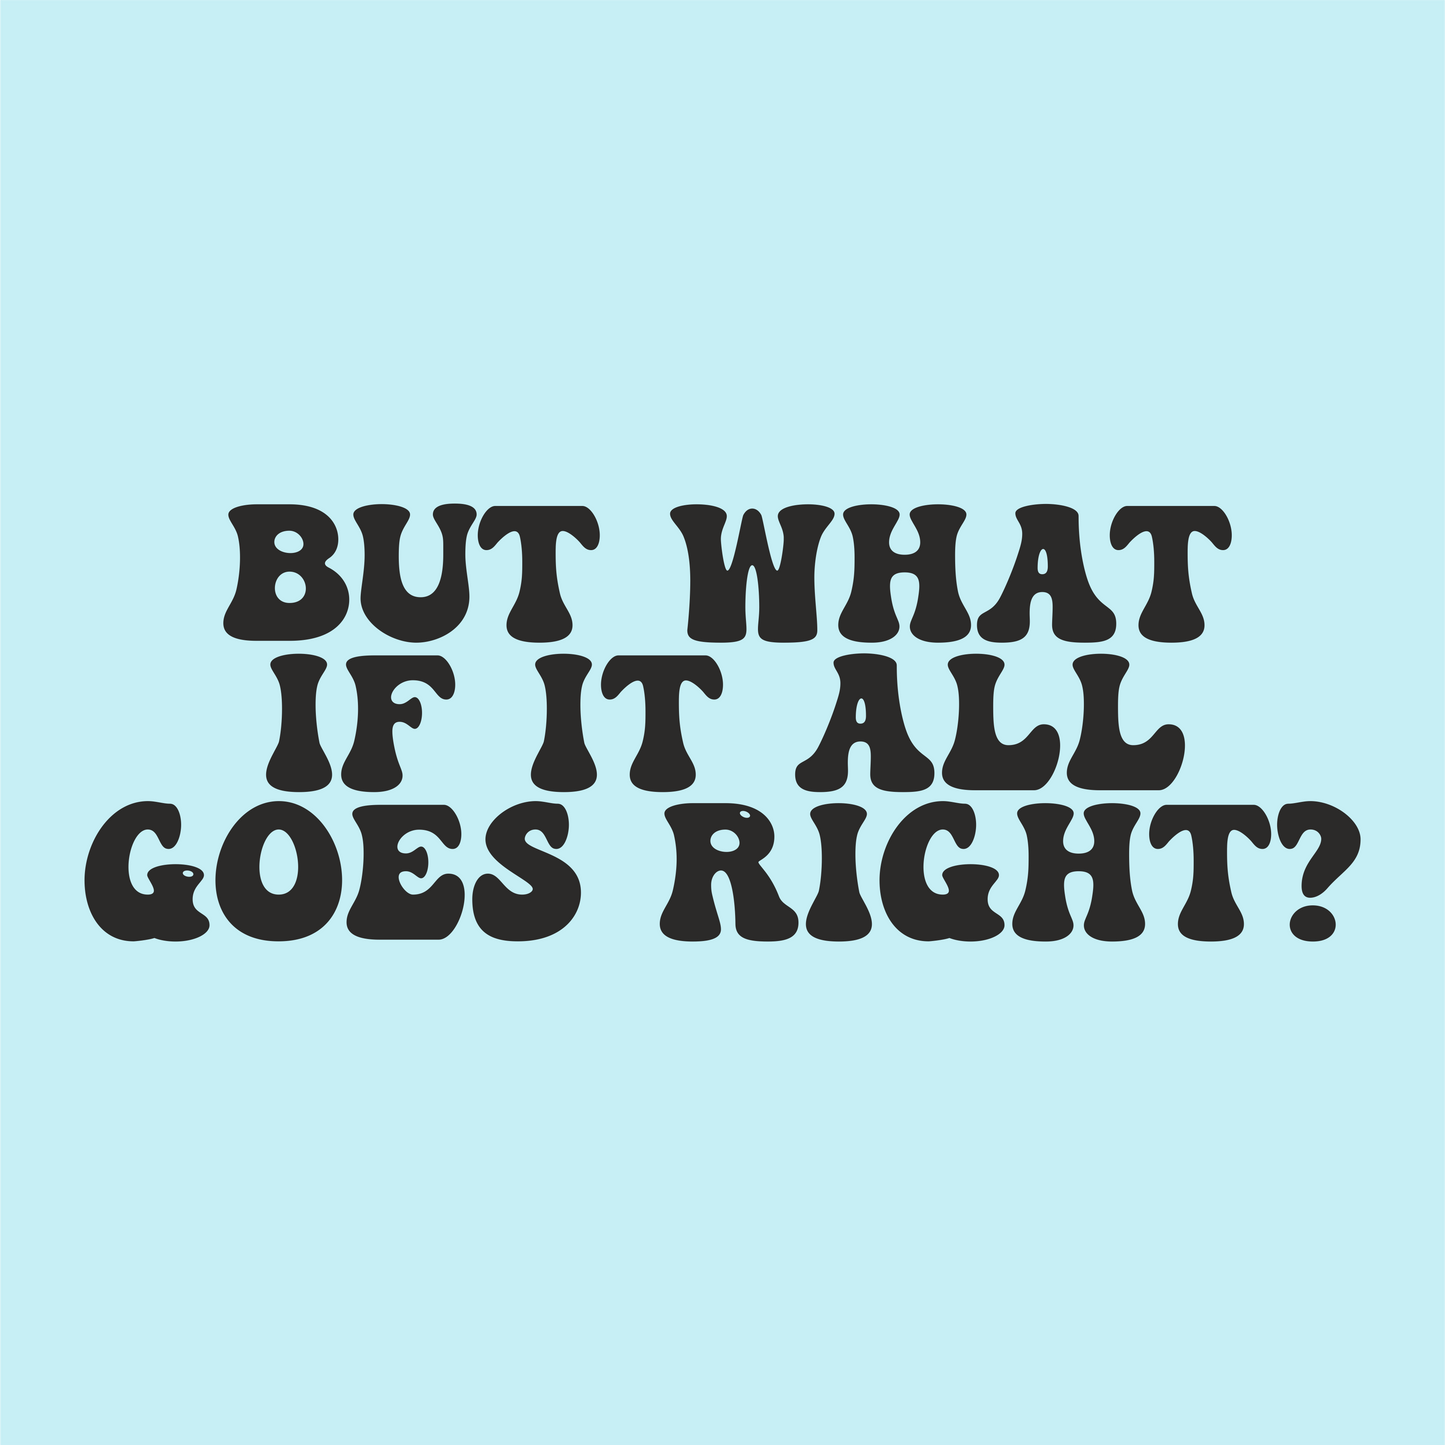 But What If It All Goes Right? Vinyl Sticker - PrintedWeird